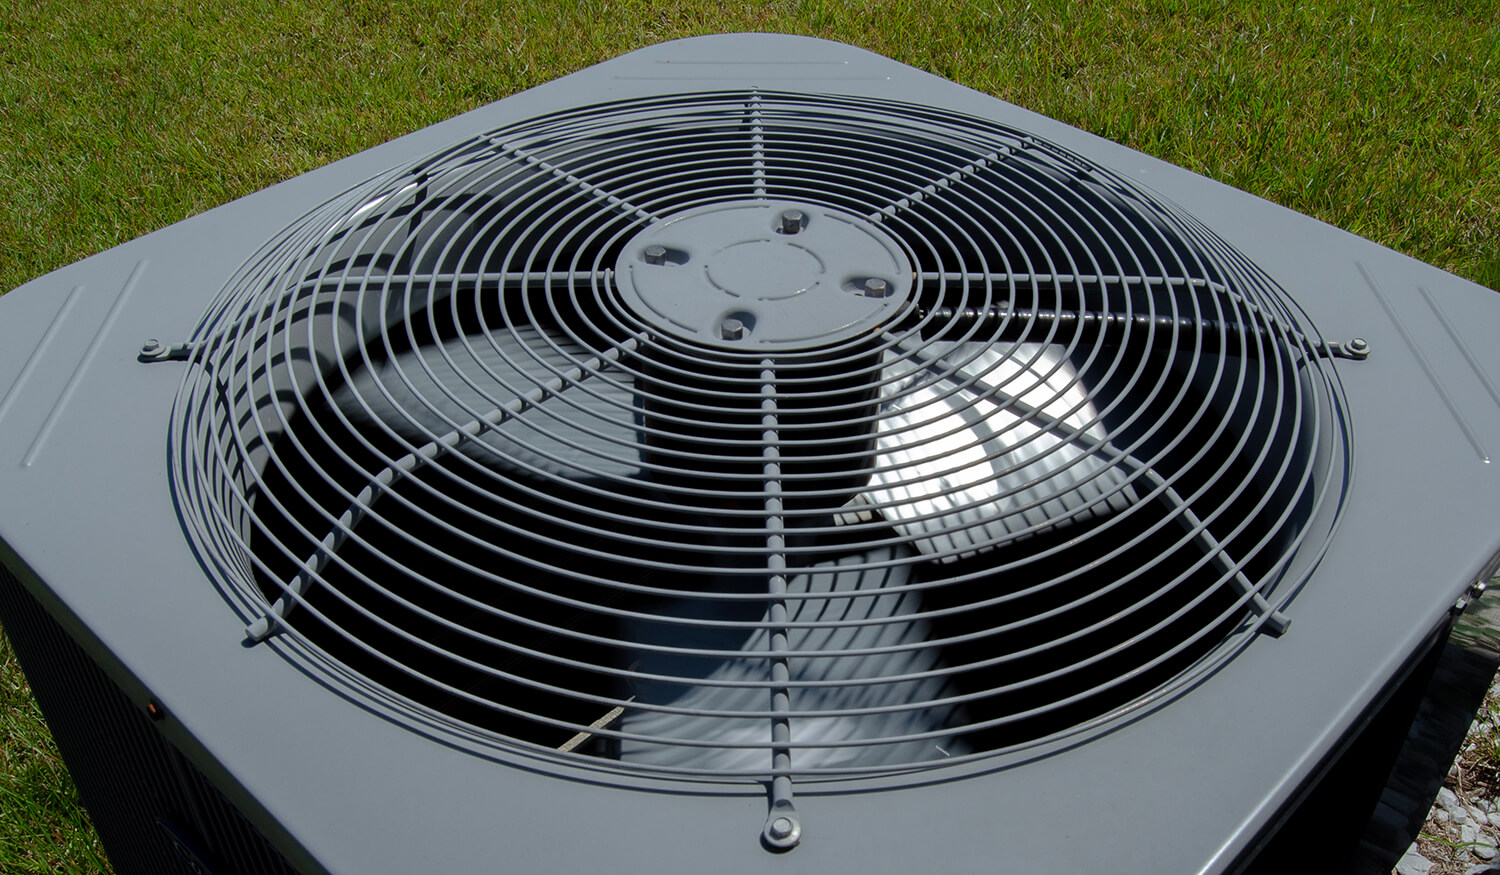 Getting proactive for Summer Heating plus A/C savings